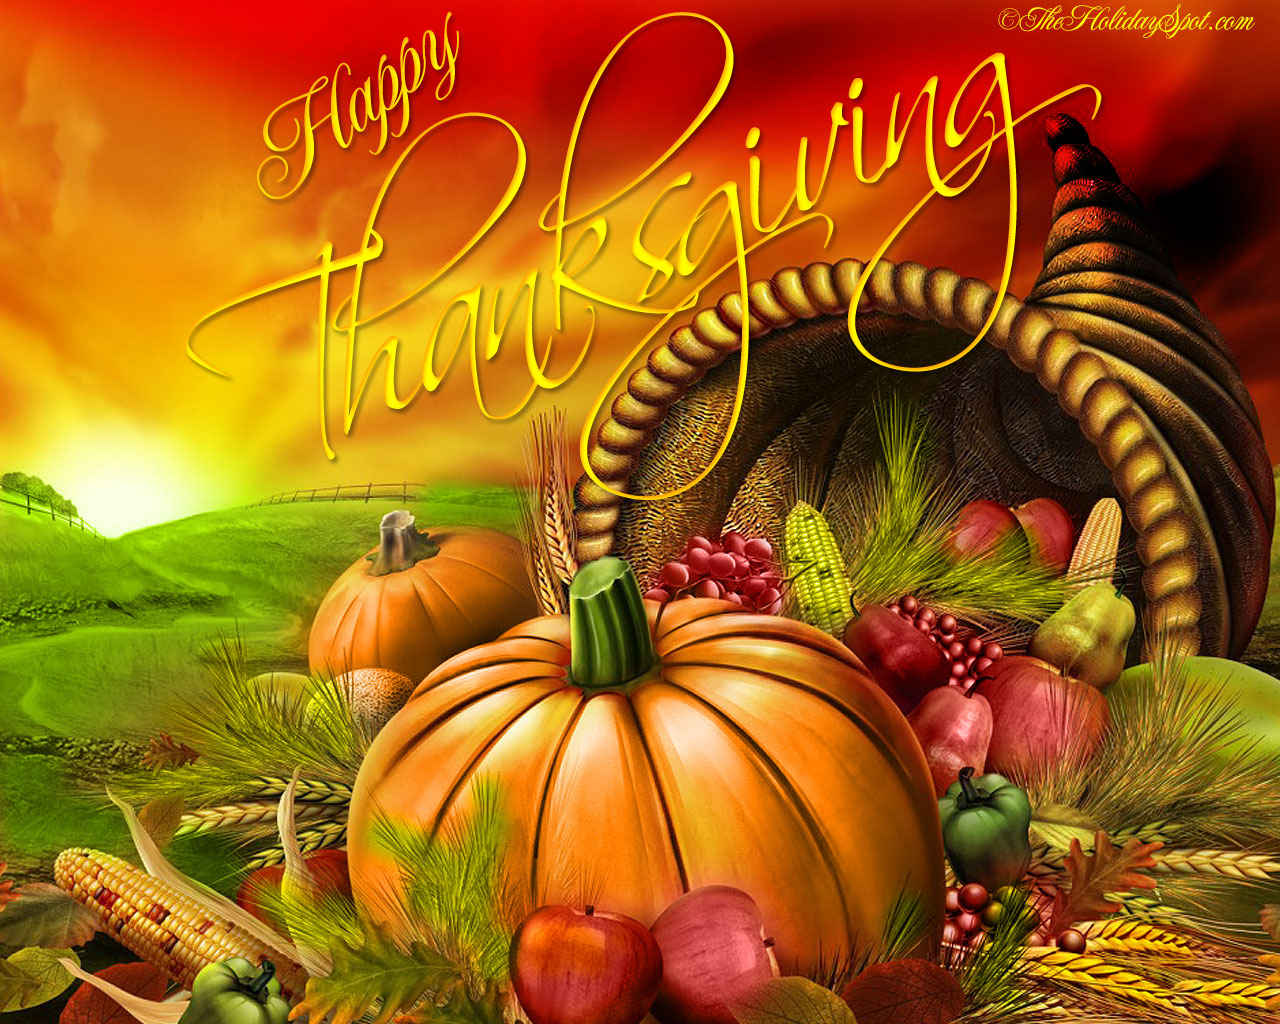 Happy Thanksgiving 2016 Images | Wallpapers, Backgrounds, Images ...